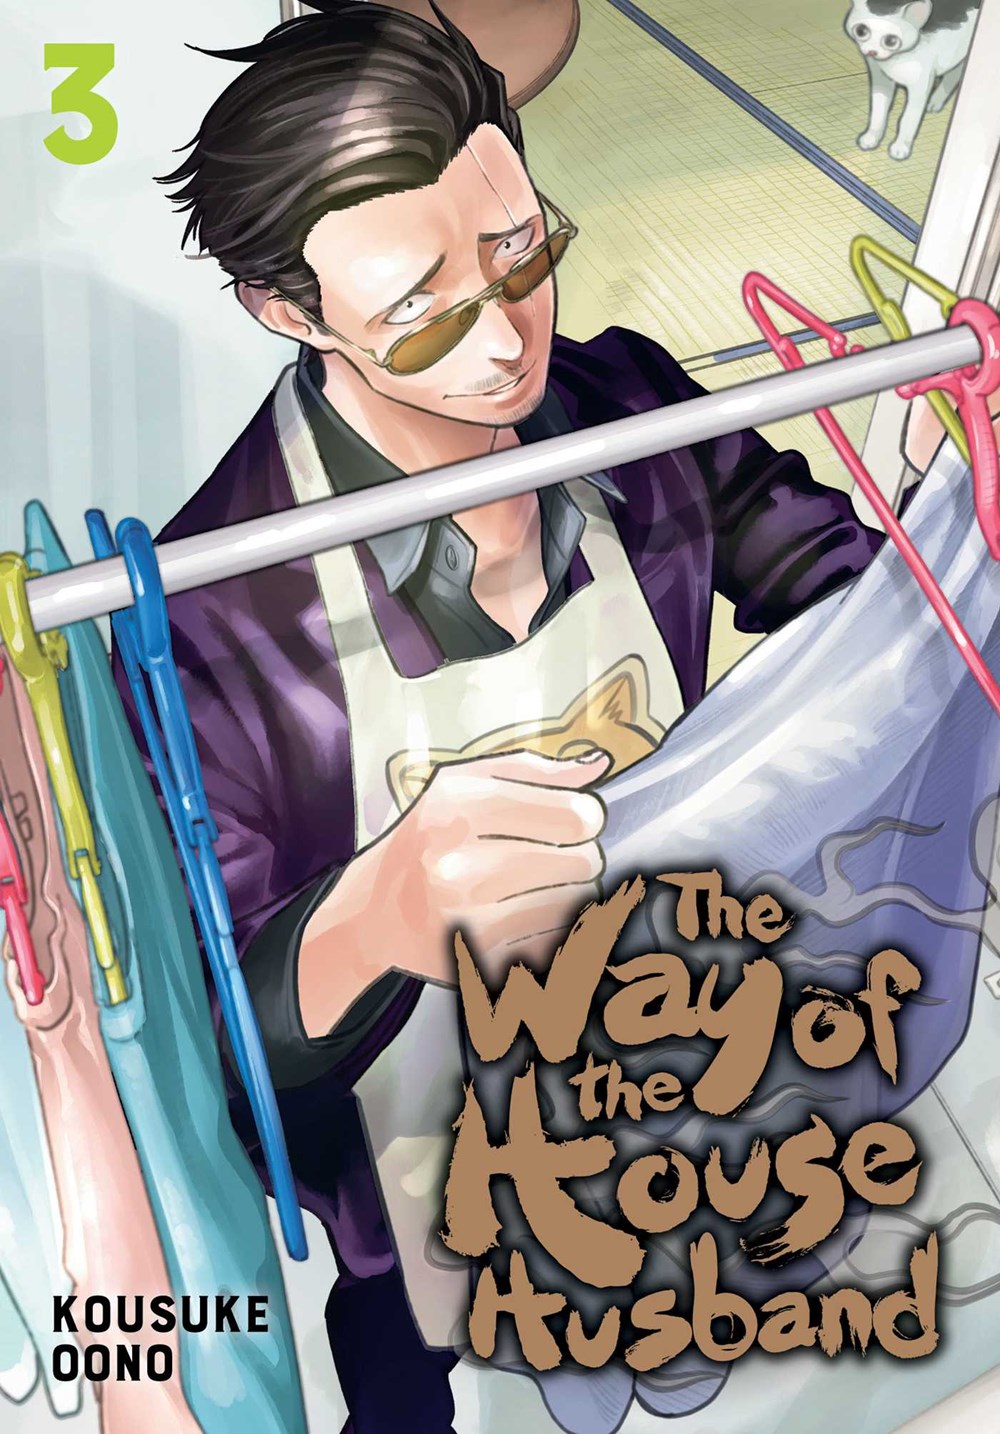 The Way of the Househusband  Vol. 3